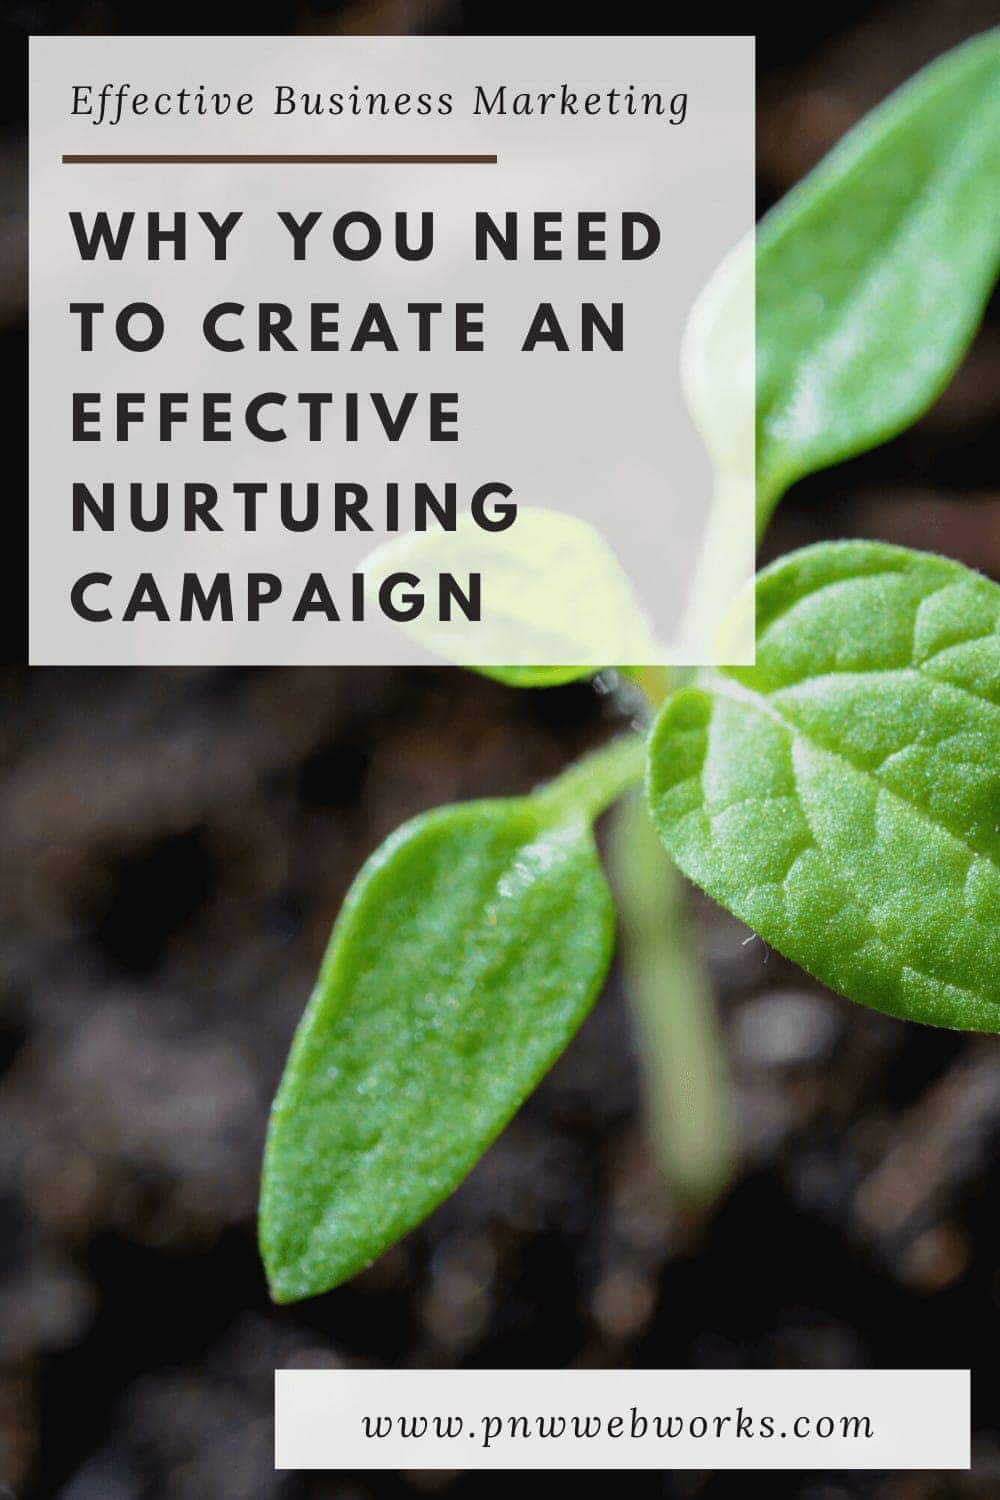 Why You Need to Create an Effective Nurturing Campaign